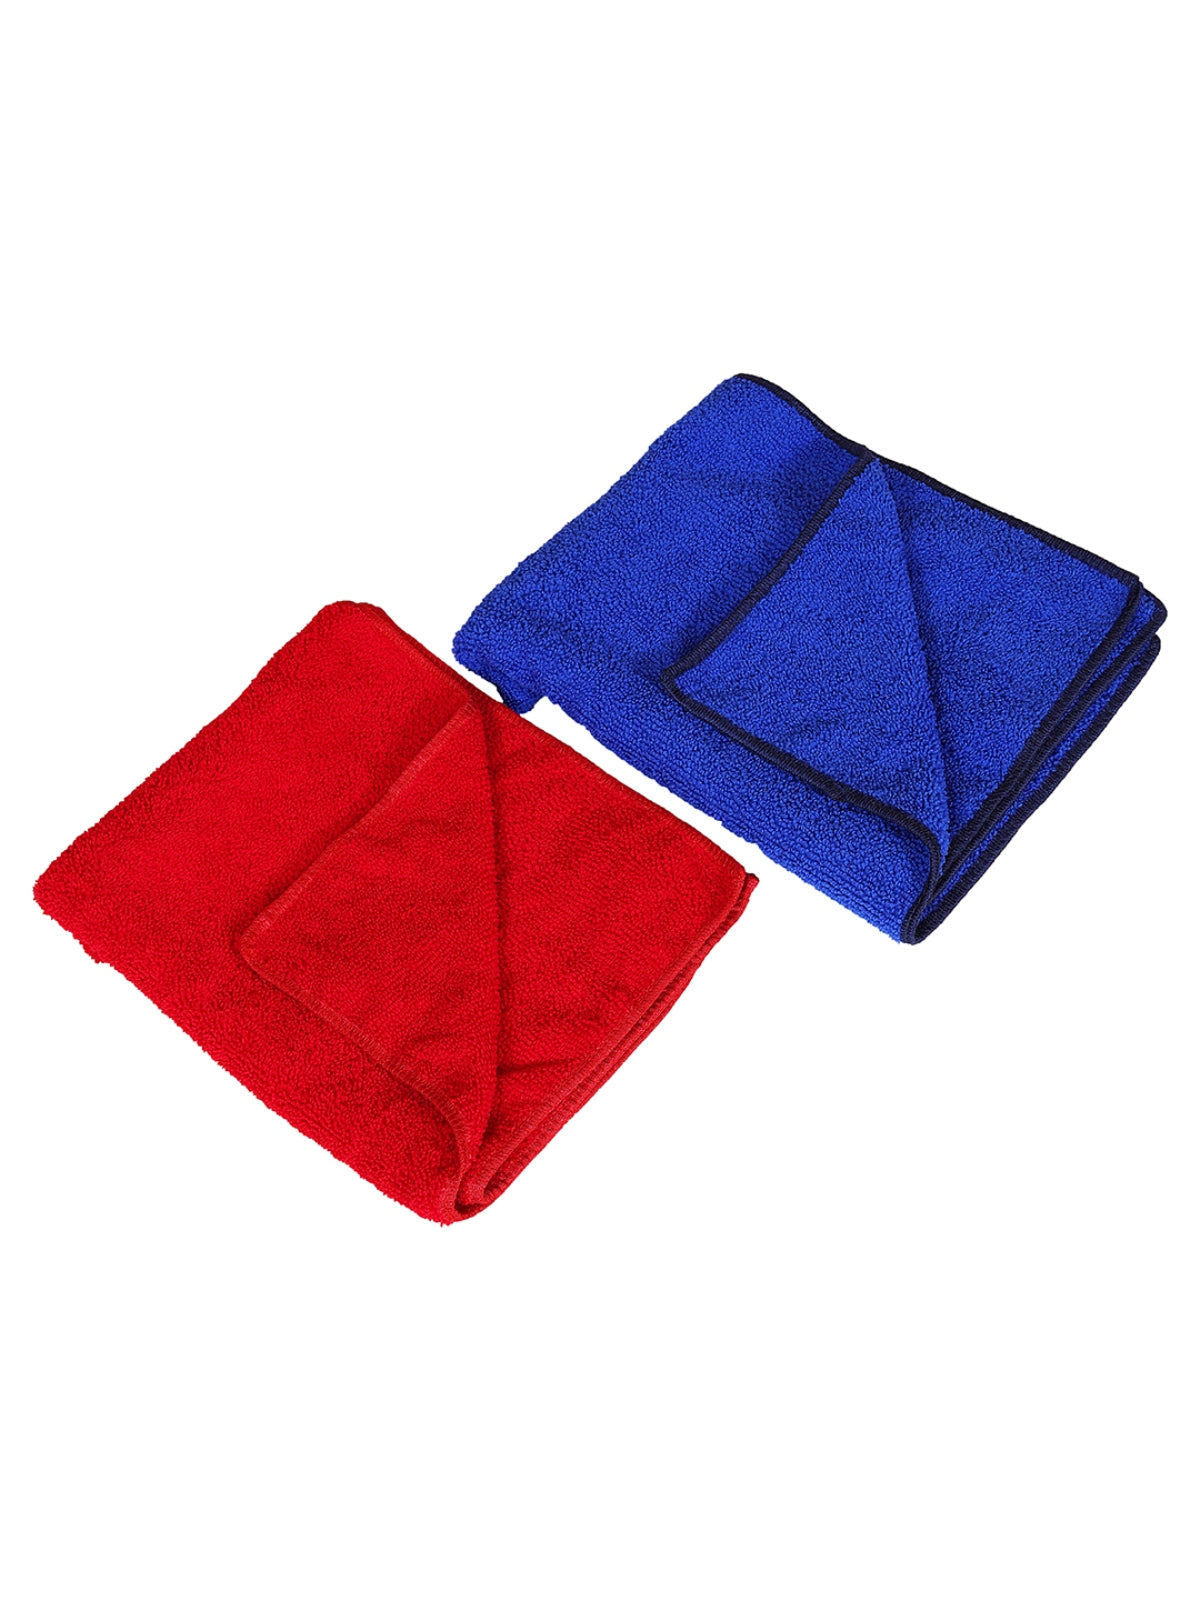 Set of 6 Blue & Red Solid Cotton Hand Towels